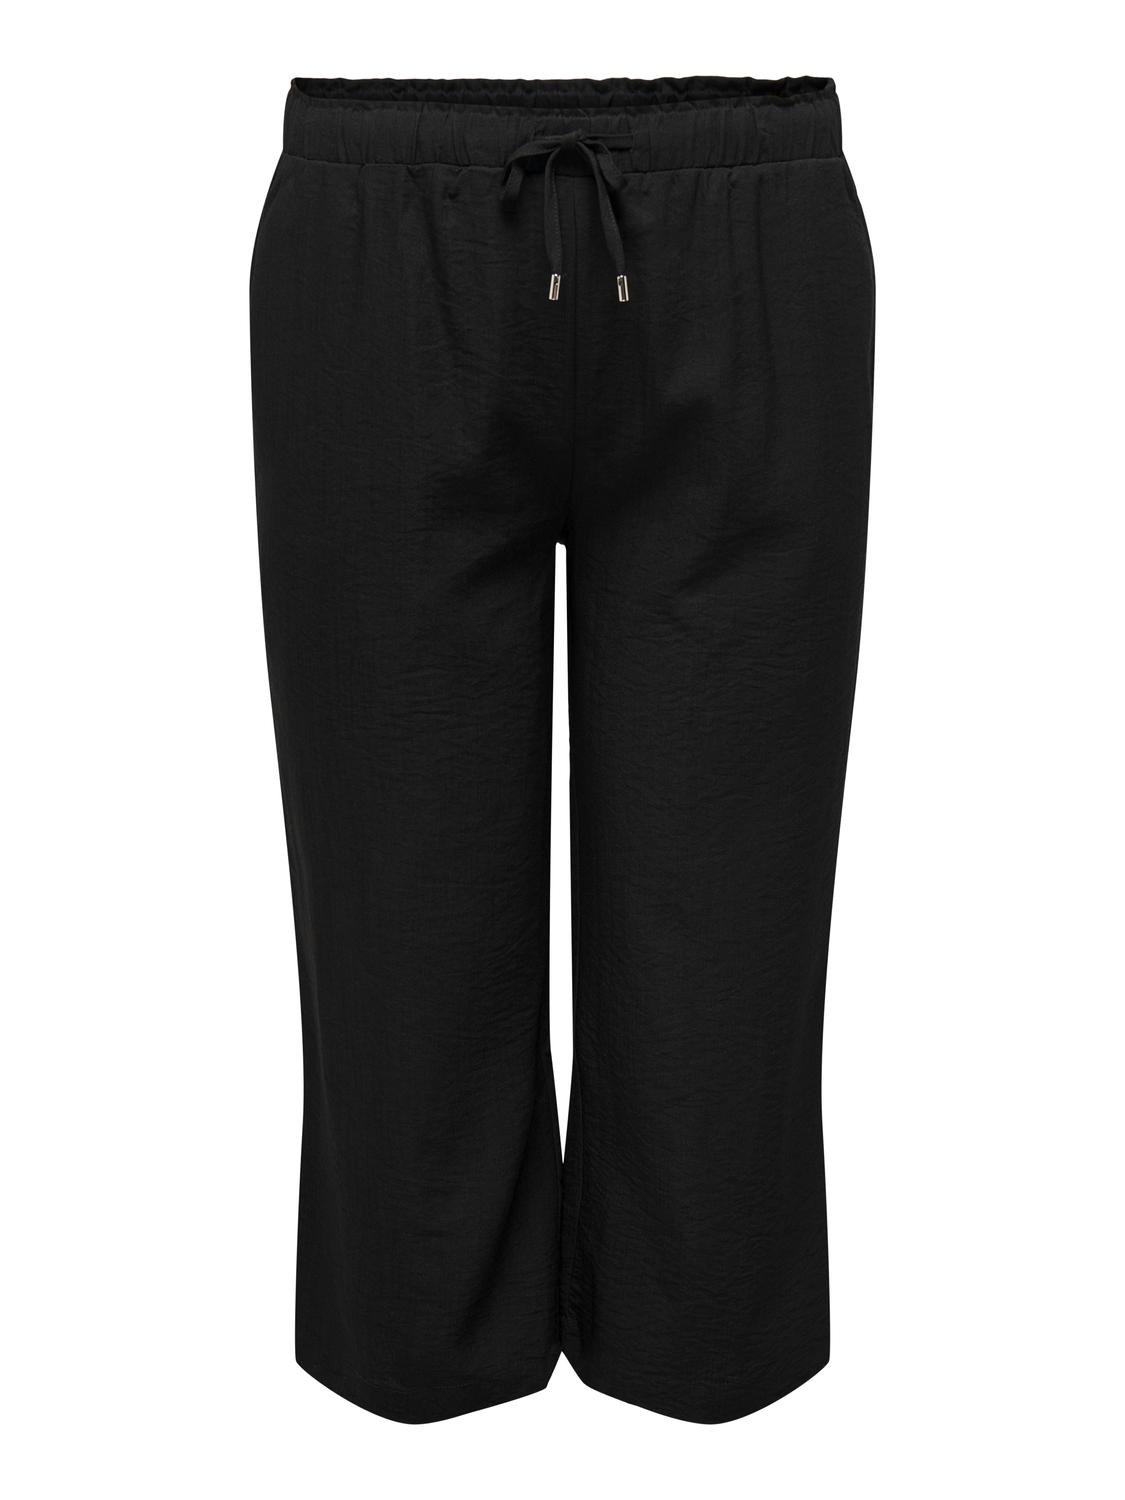 ONLY Curvy culotte trousers -Black - 15312294